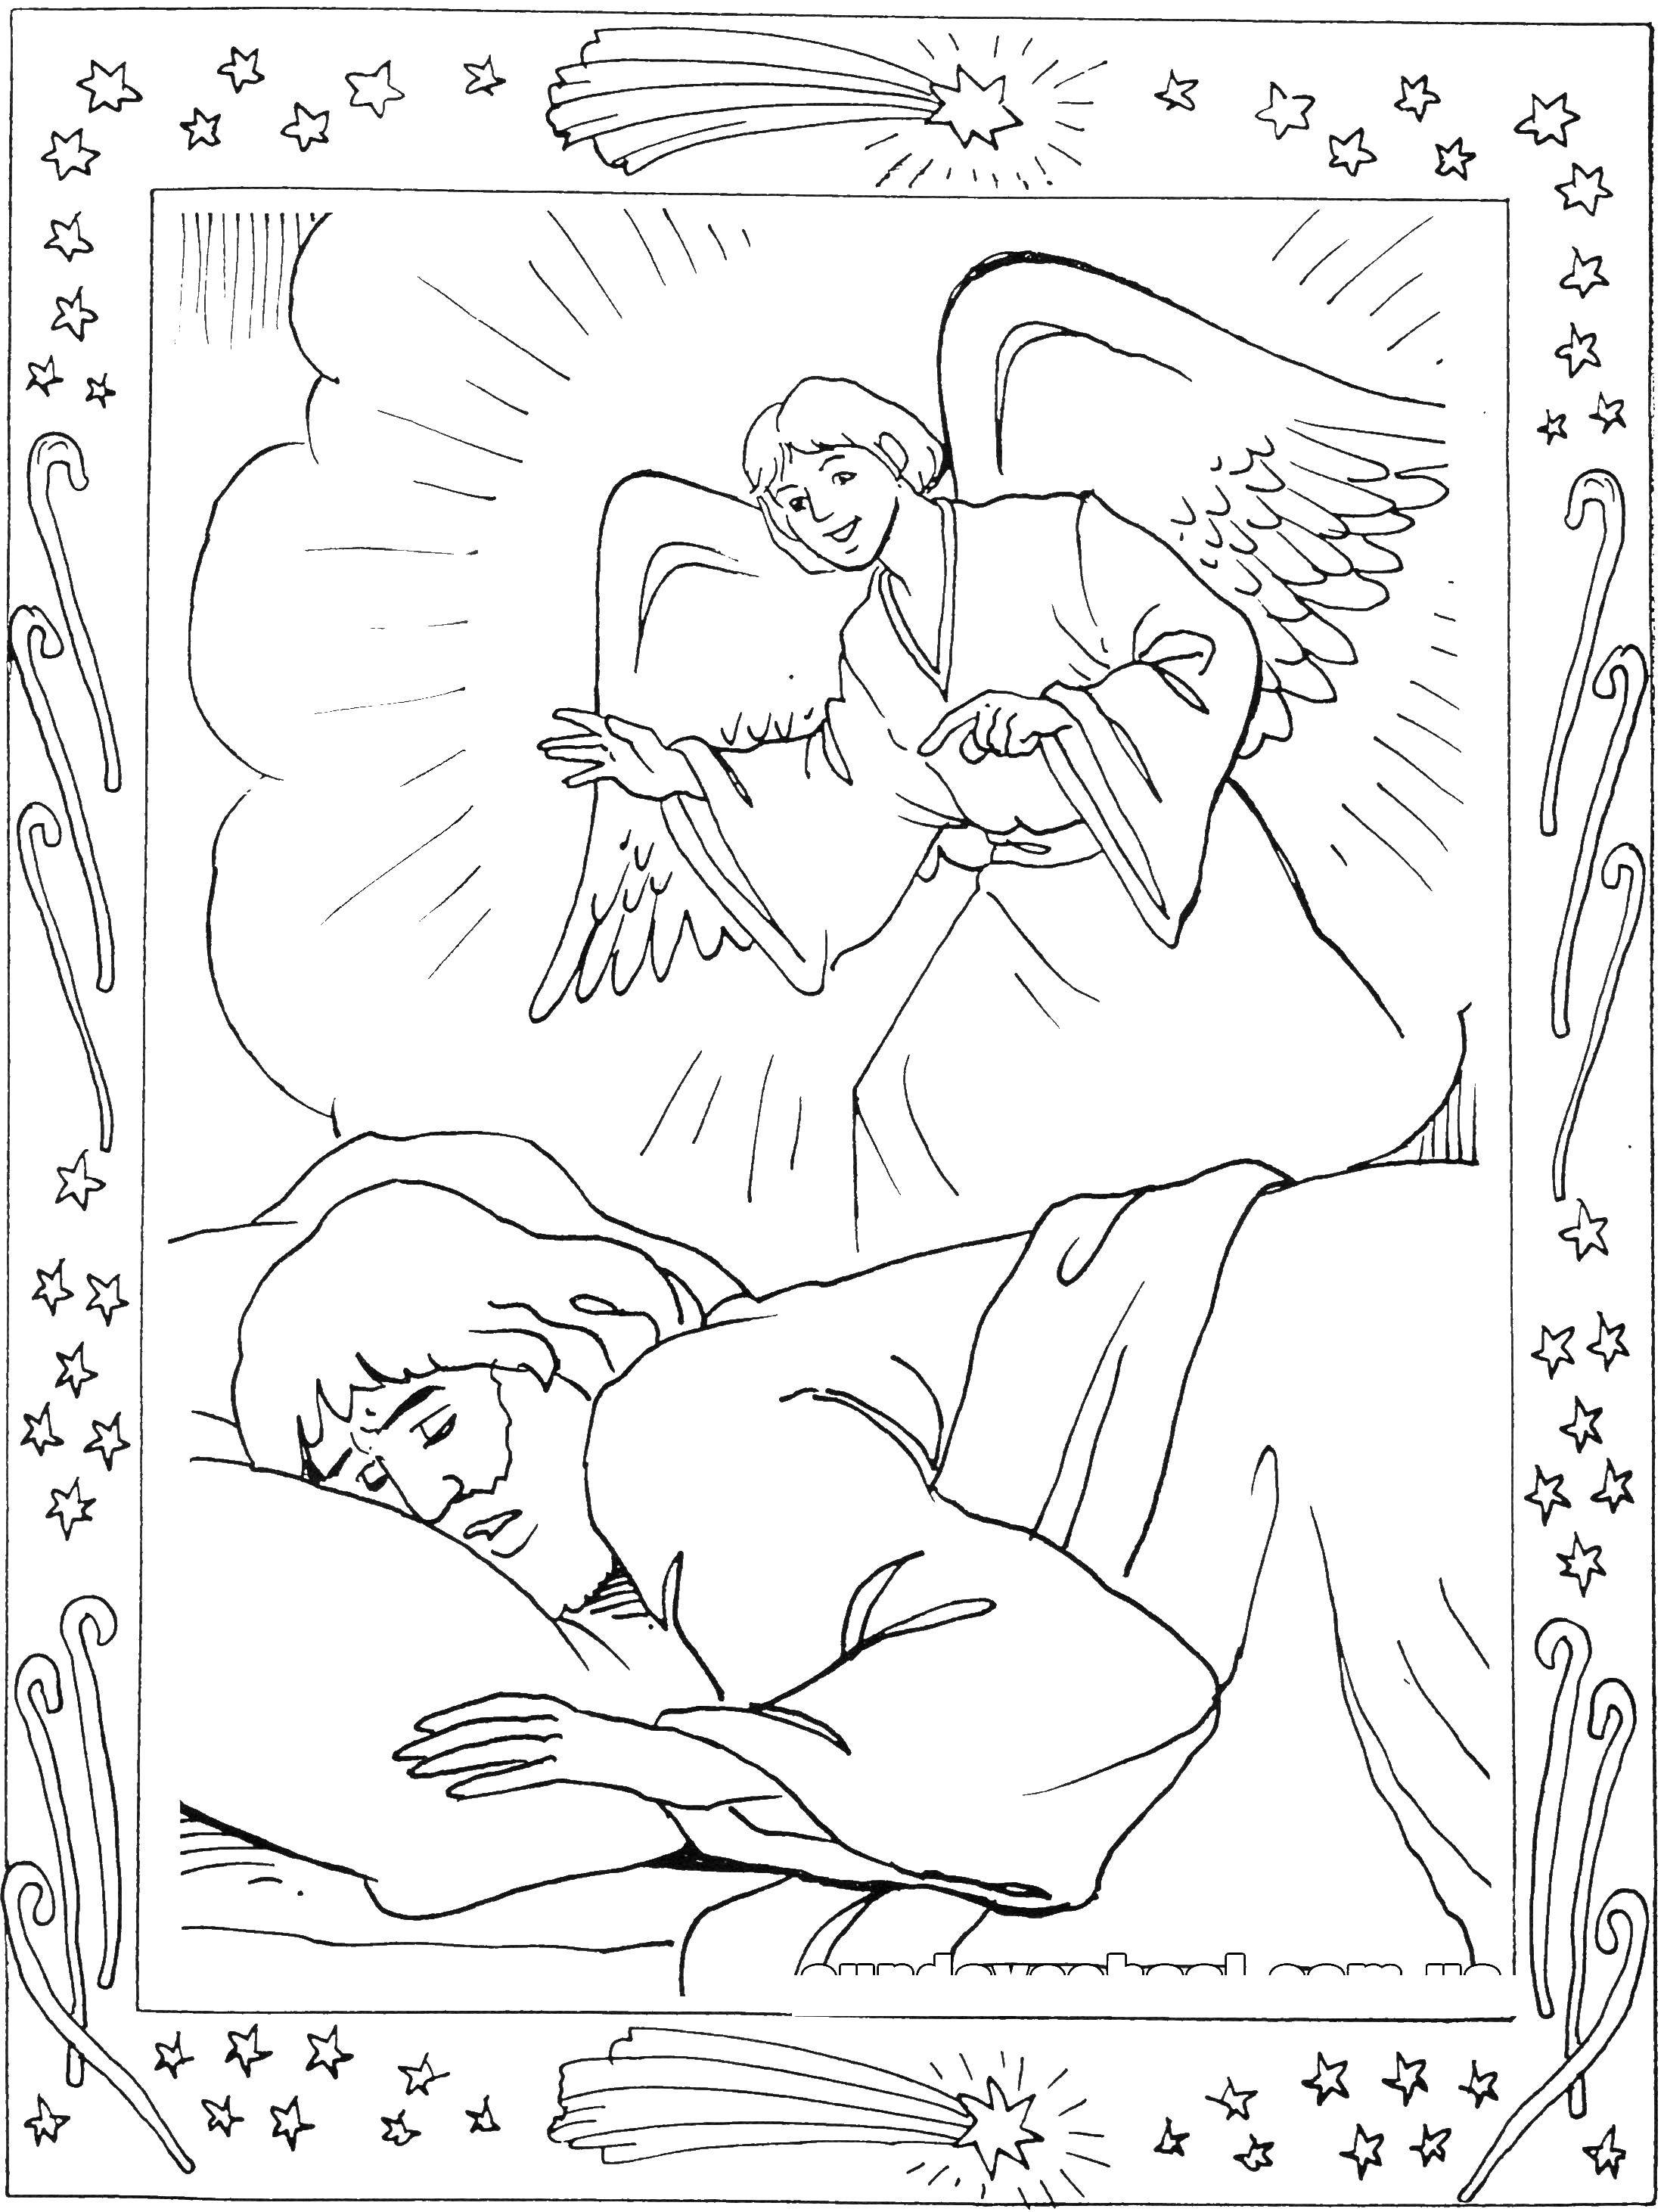 Coloring The angel came to the sleeping man. Category religion. Tags:  angel , religion.